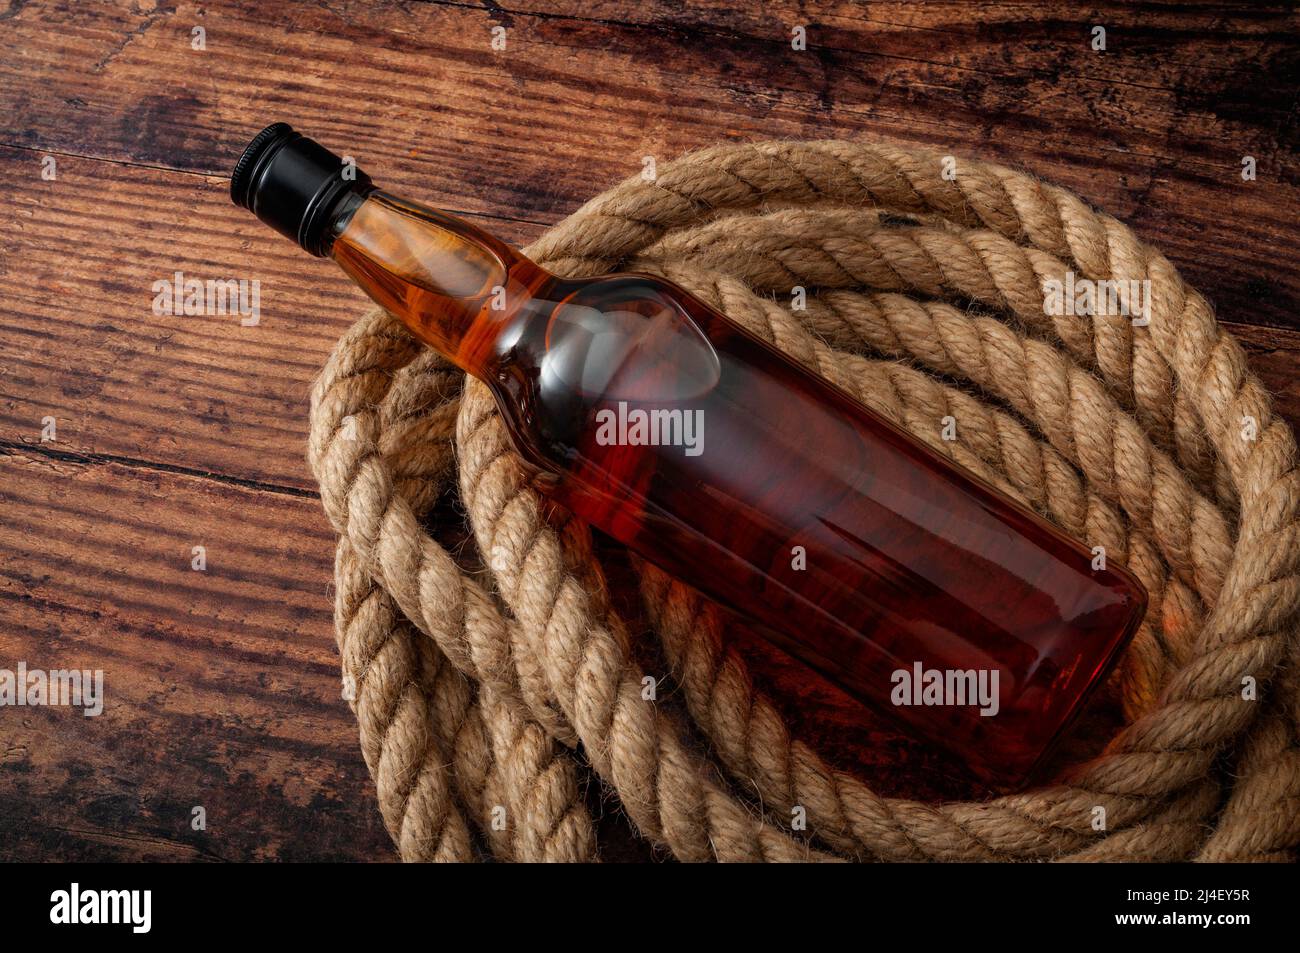 alcoholism in rural america and excessive distilled alcohol and hard liquor drinking concept theme with a bottle of scotch whiskey or brandy and rope Stock Photo